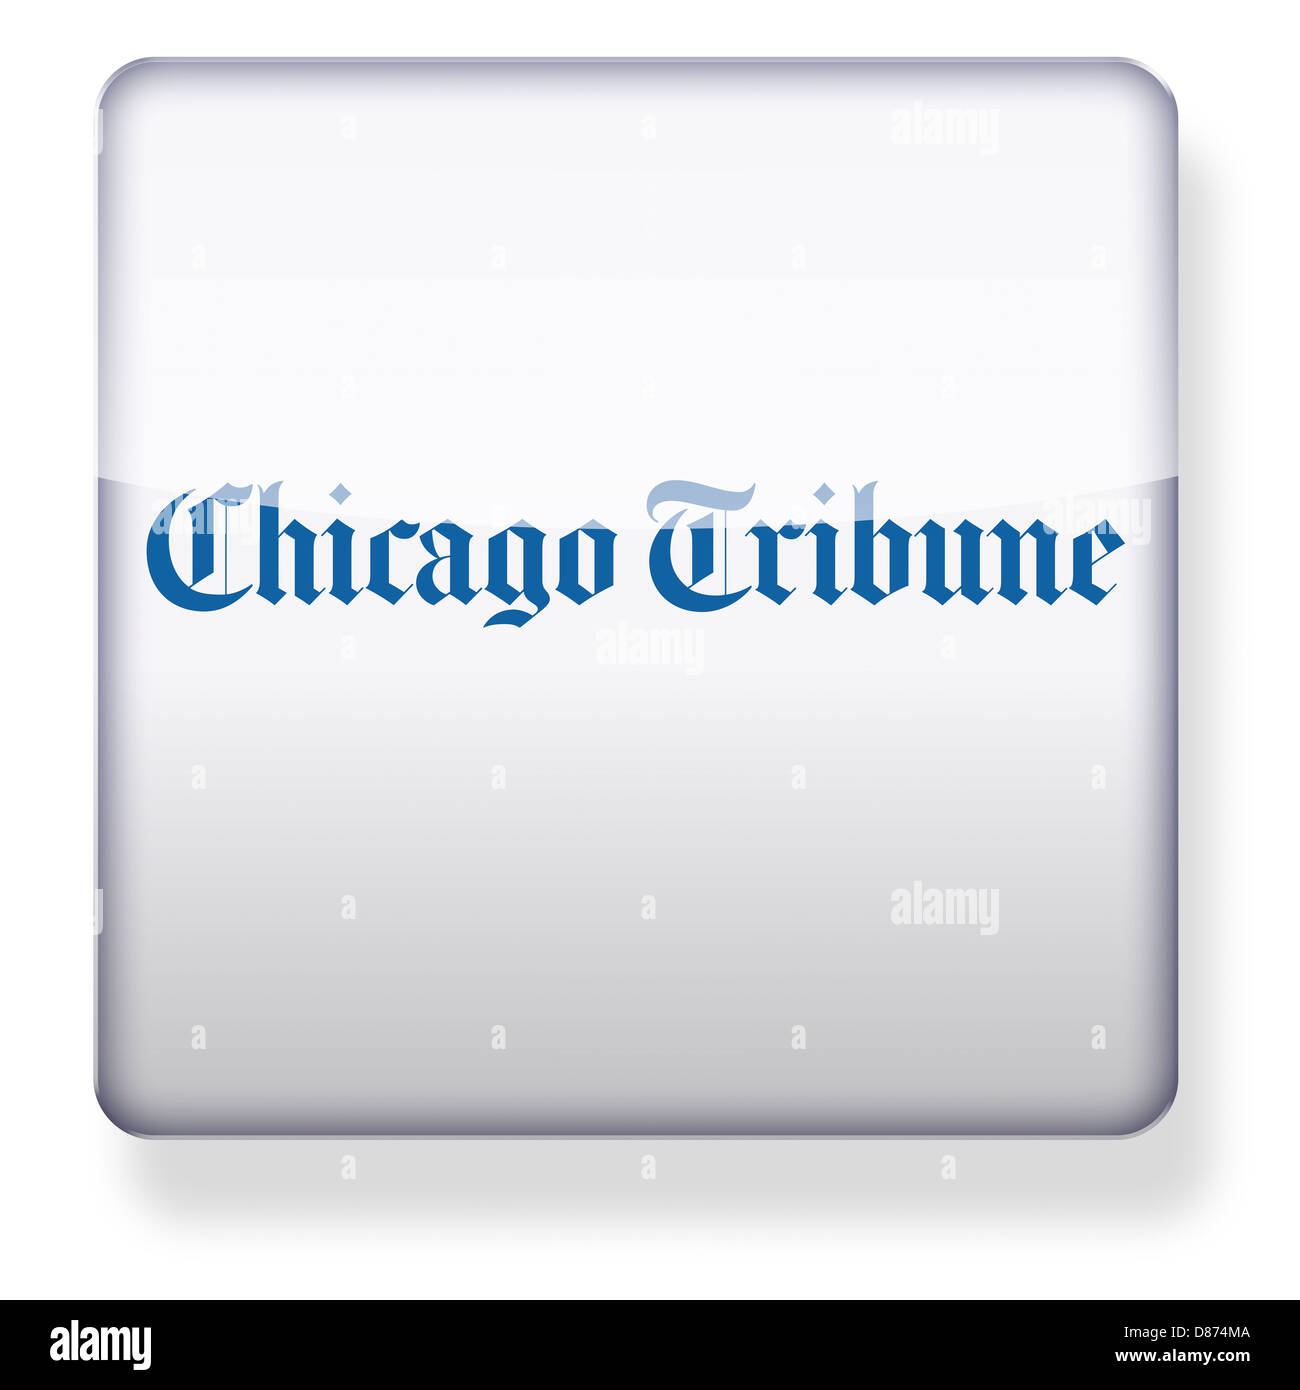 Chicago Tribune logo as an app icon. Clipping path included. Stock Photo